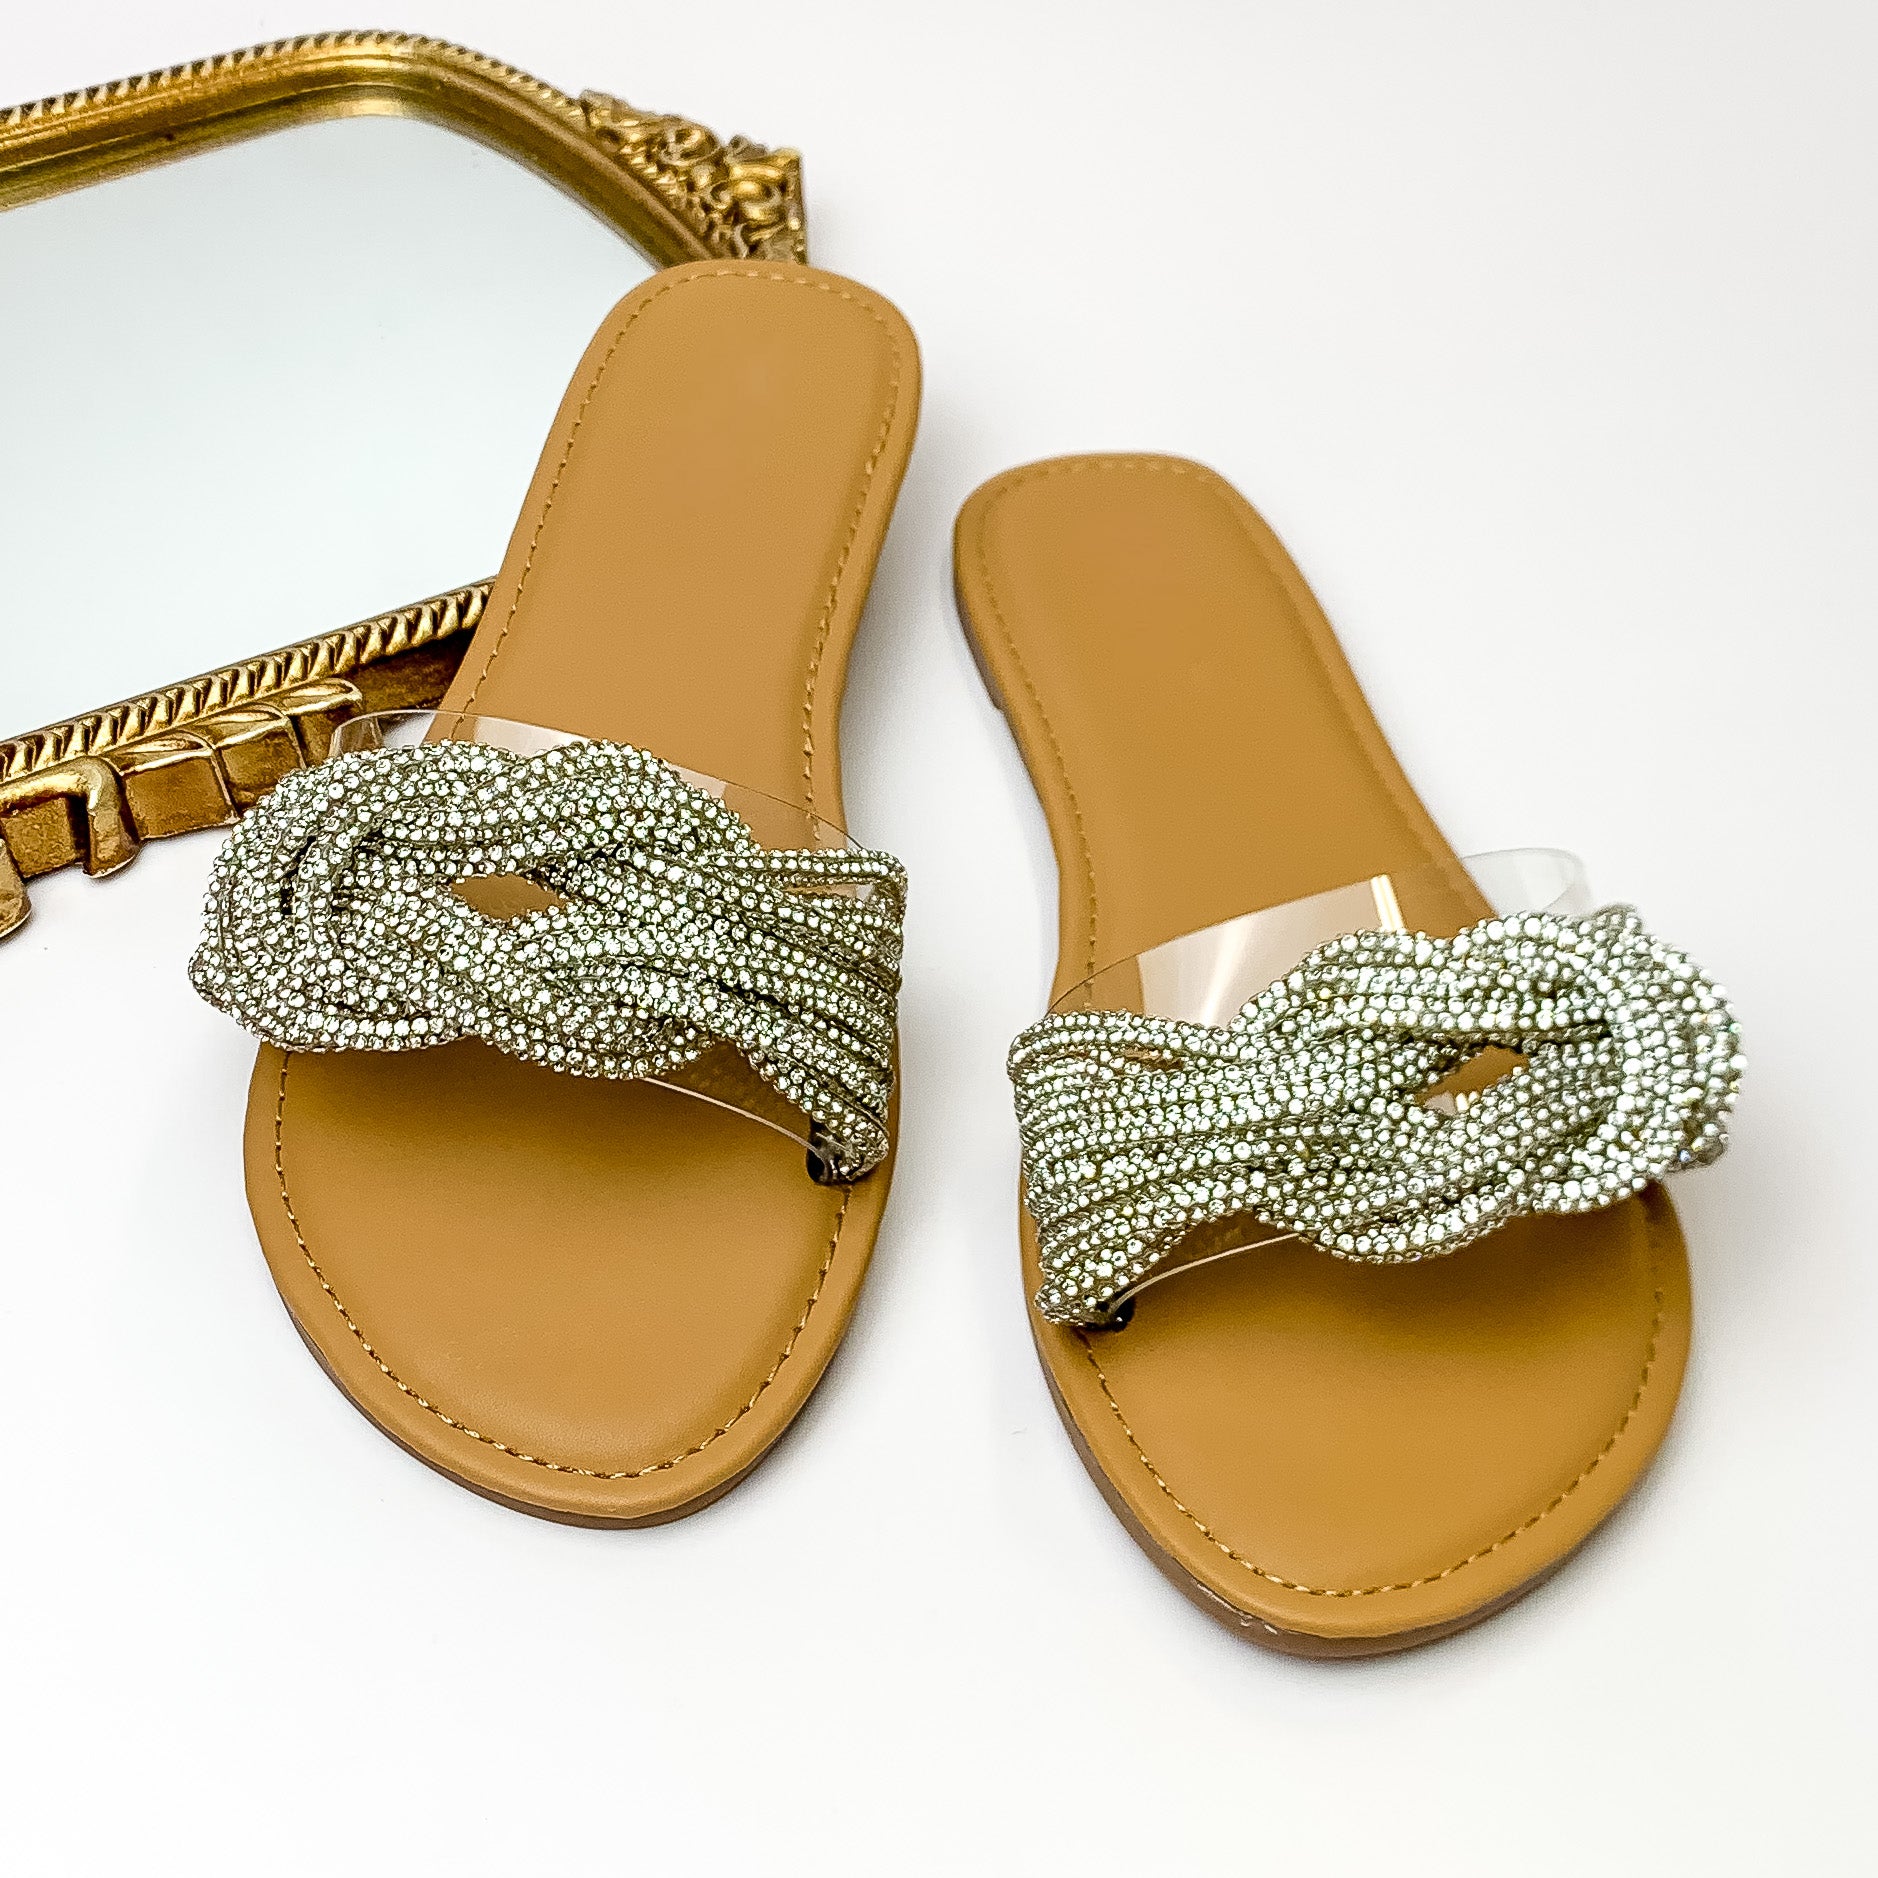 Tan sandals with a clear band that has clear crystals bands tied in a knot on top of the clear band. These sandals are pictured on a white background with a gold mirror in the top left corner. 